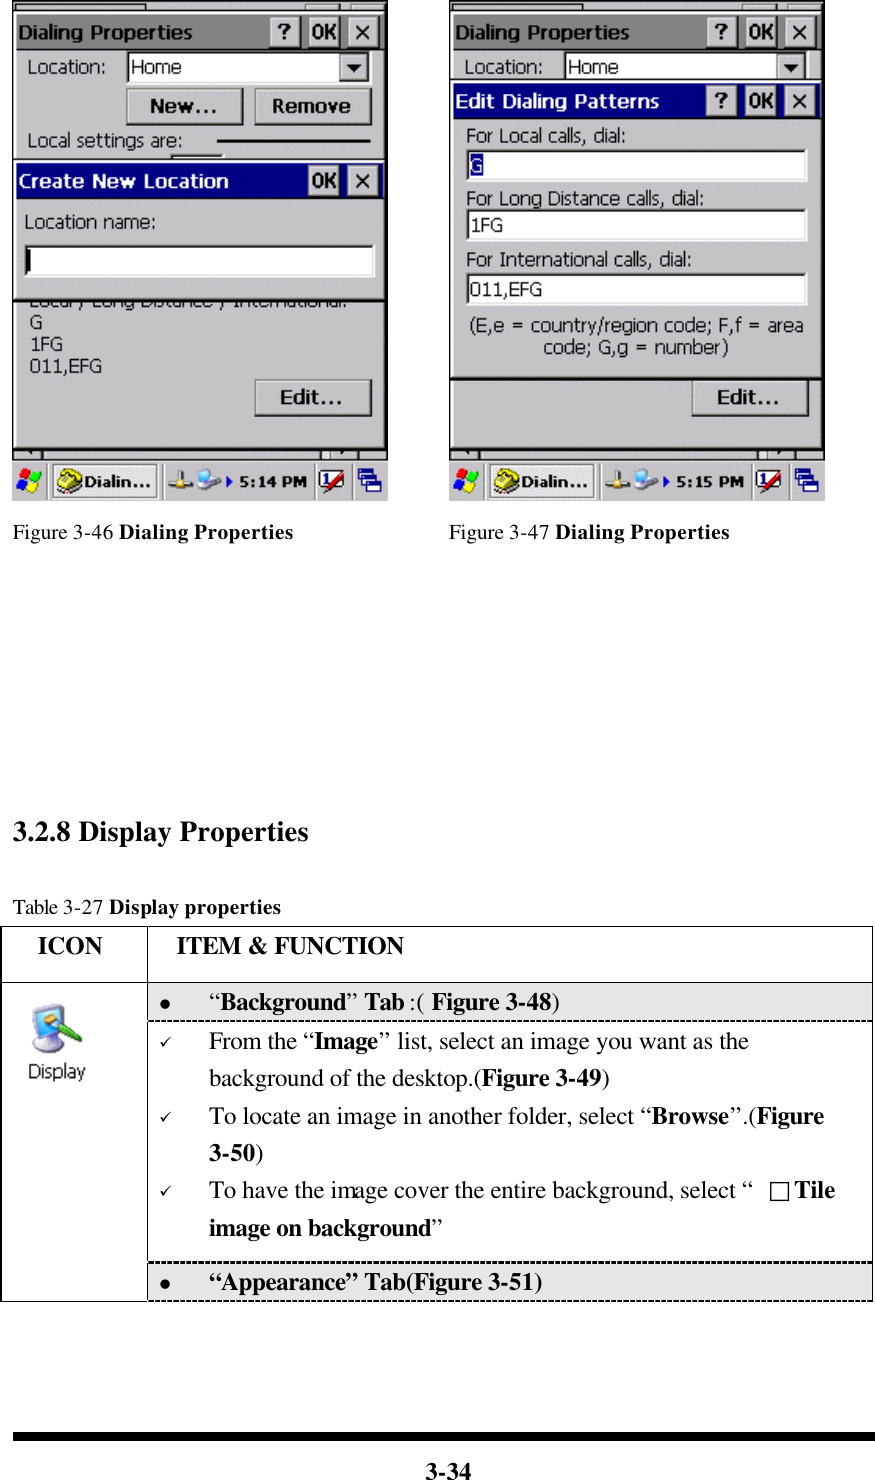  3-34       Figure 3-46 Dialing Properties Figure 3-47 Dialing Properties        3.2.8 Display Properties  Table 3-27 Display properties   ICON  ITEM &amp; FUNCTION l “Background” Tab :( Figure 3-48)   ü From the “Image” list, select an image you want as the background of the desktop.(Figure 3-49) ü To locate an image in another folder, select “Browse”.(Figure 3-50) ü To have the image cover the entire background, select “  □Tile image on background”   l “Appearance” Tab(Figure 3-51) 